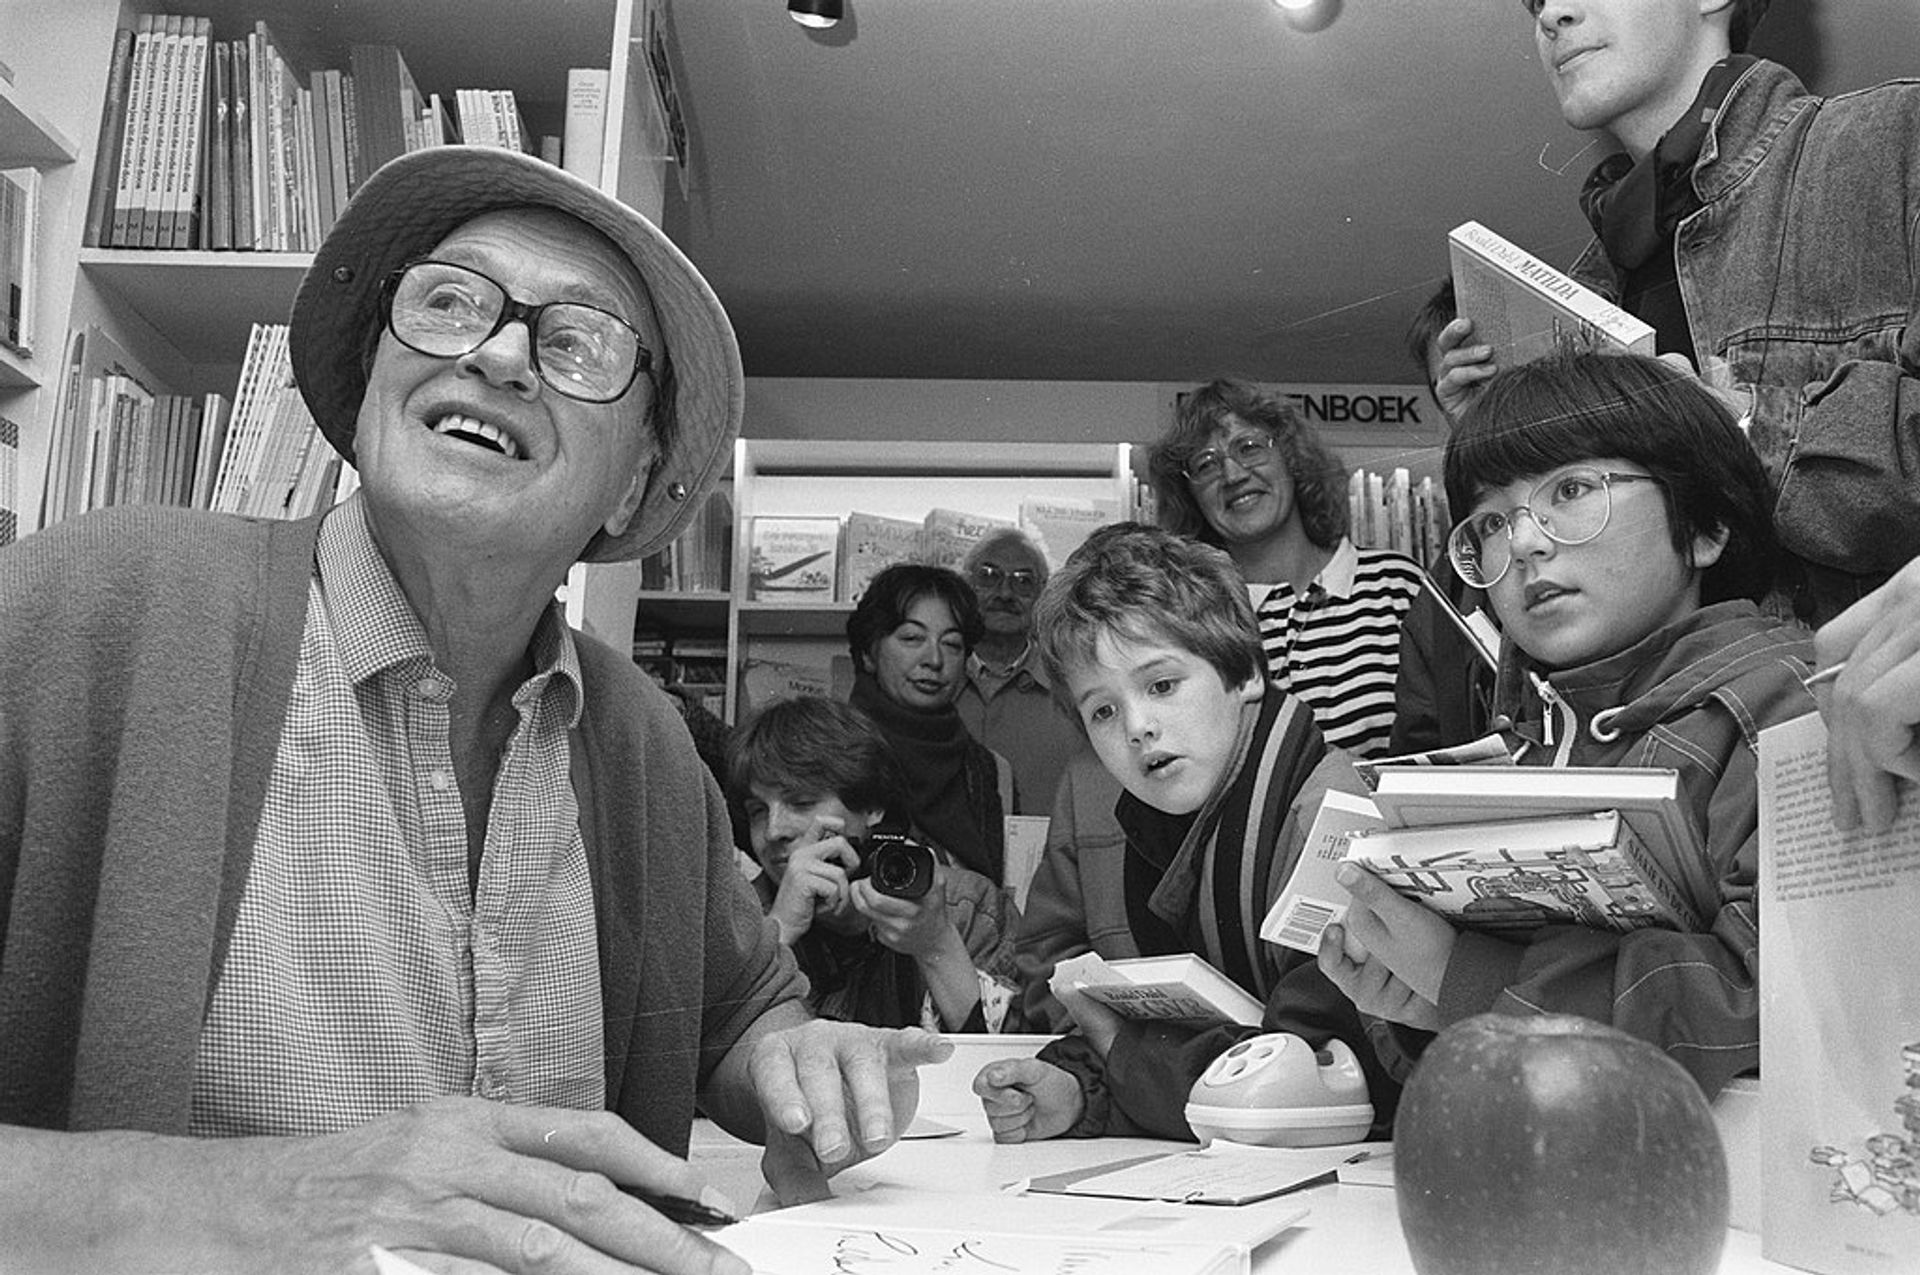 Roald Dahl at a book signing in Amsterdam in 1988

Wikimedia